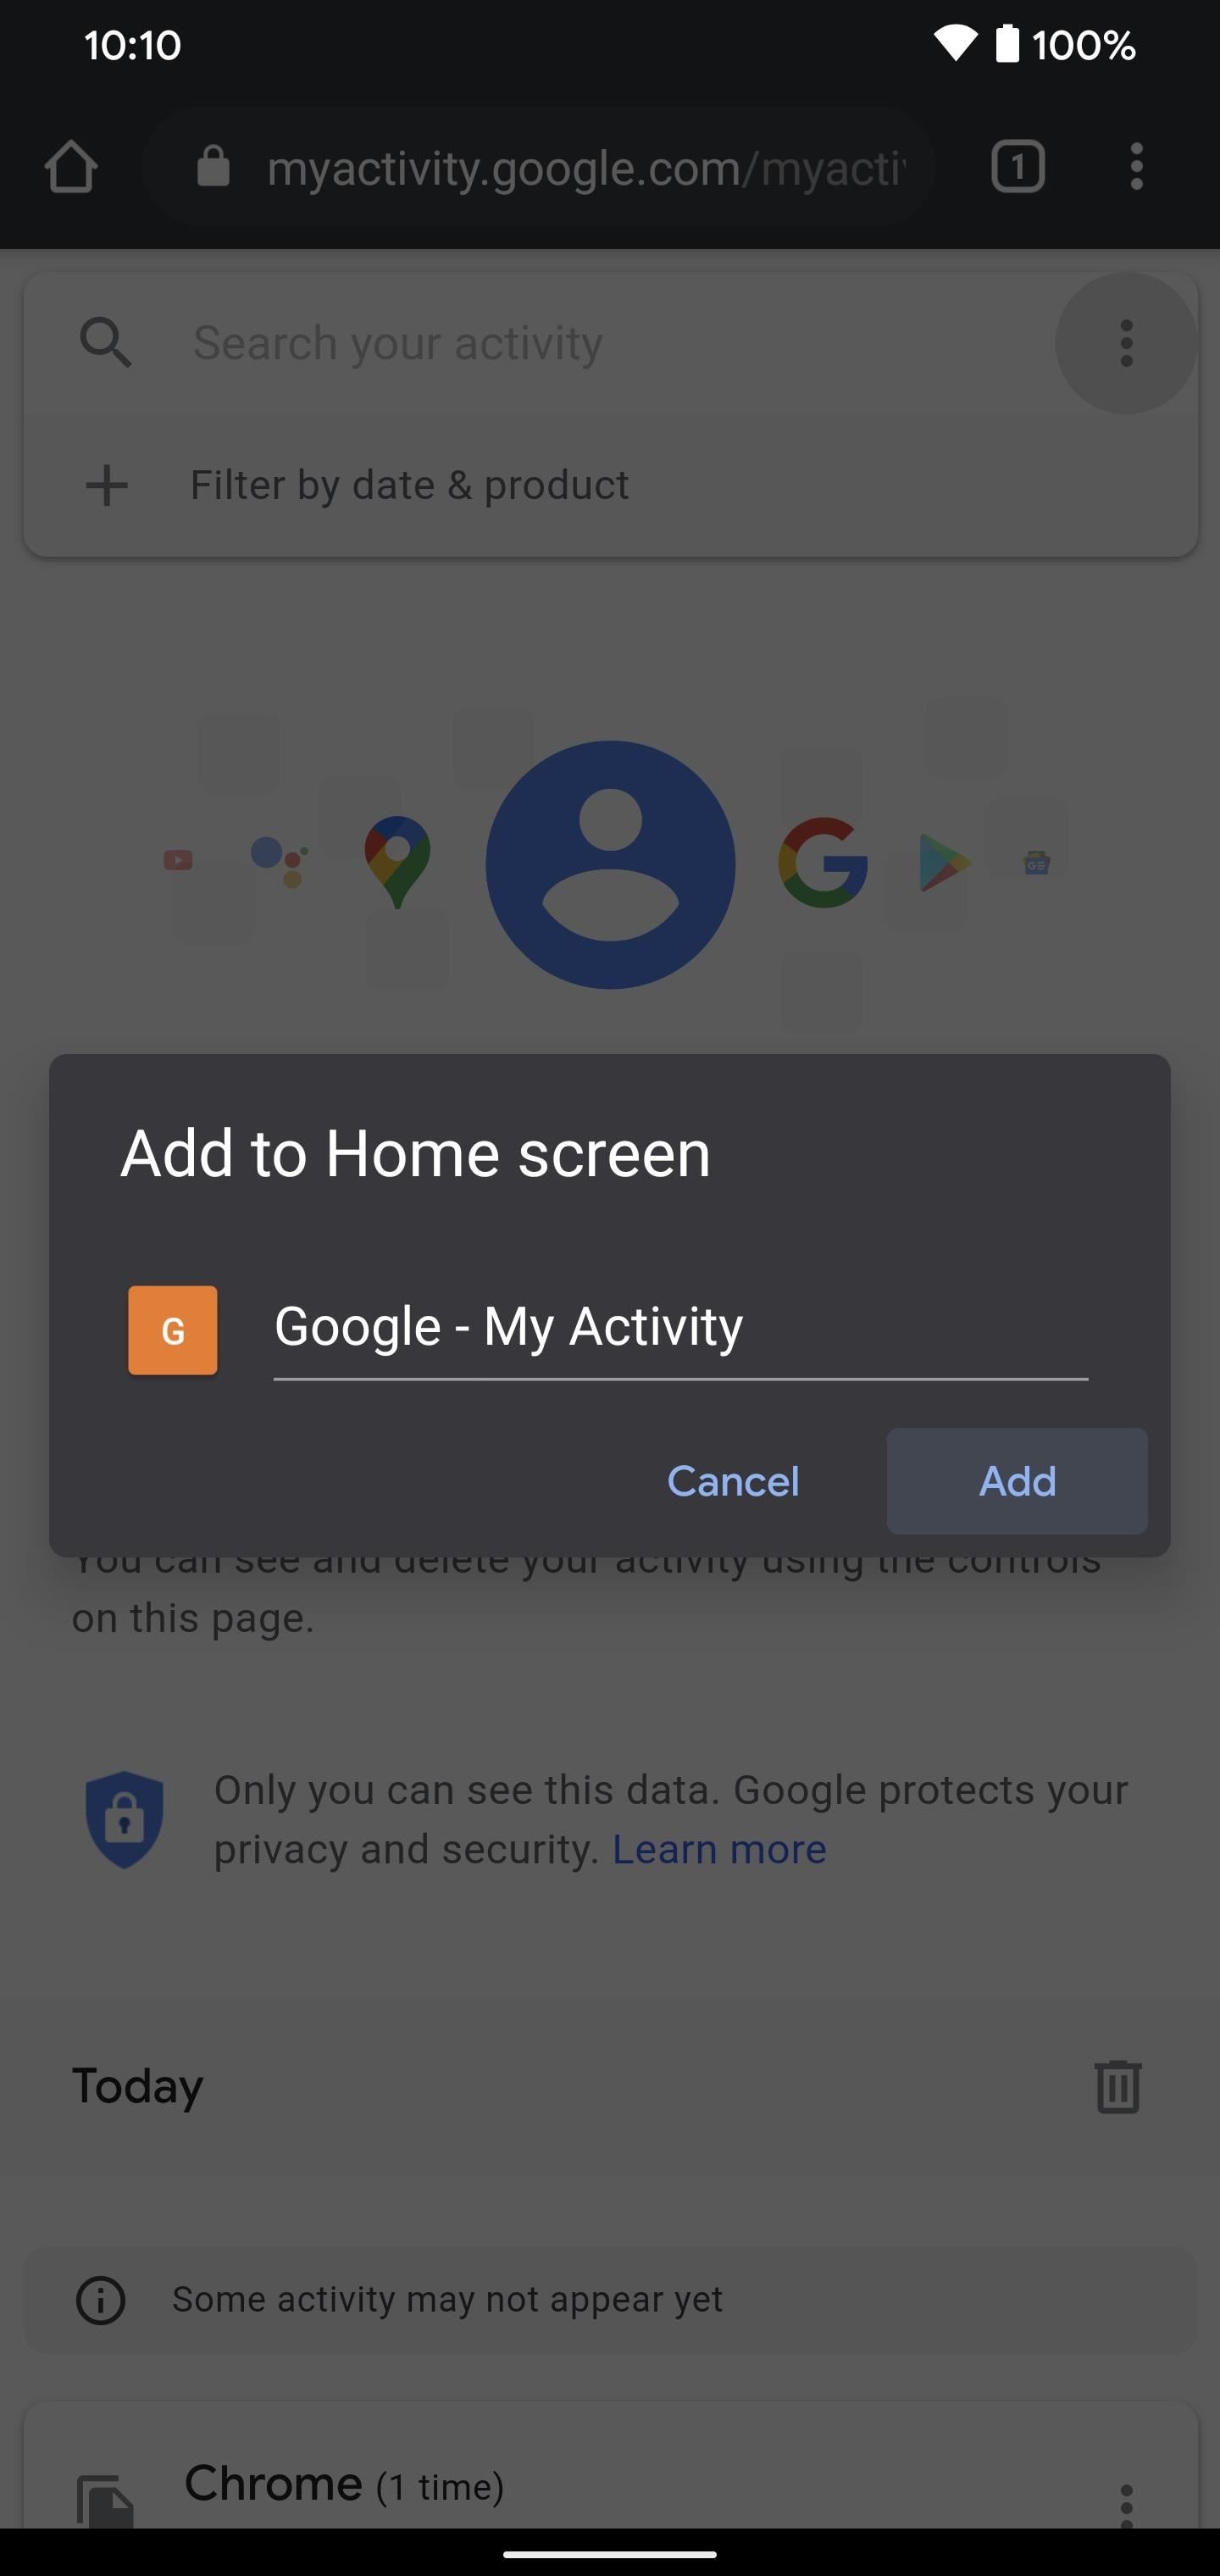 How to Make a Panic Button That Deletes All Your Google History in Seconds